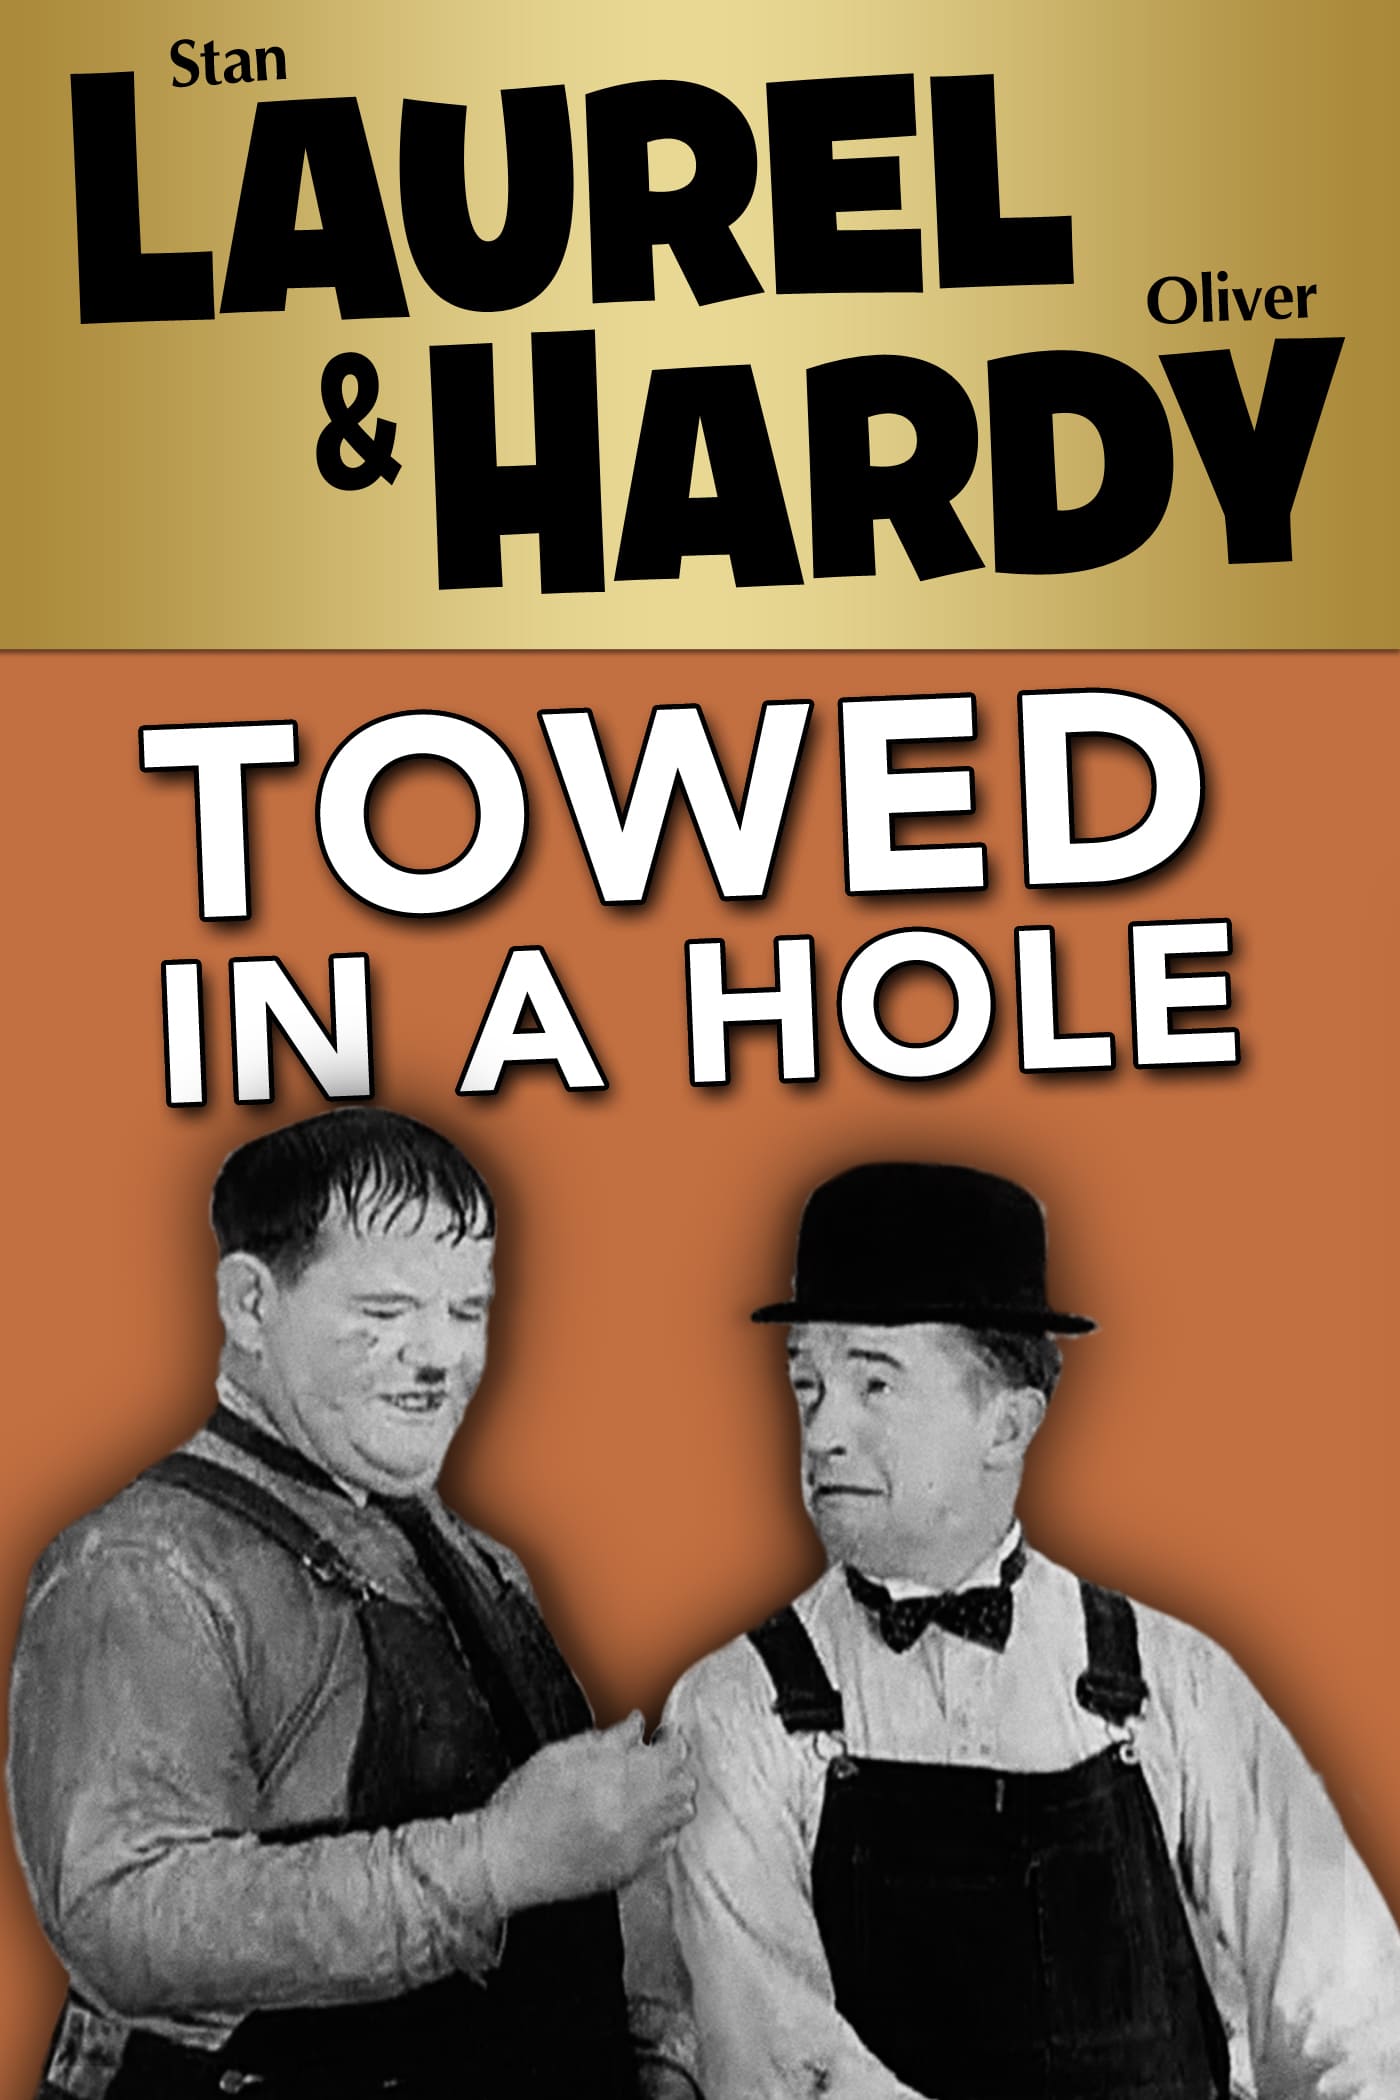 Poster for the movie "Towed in a Hole"